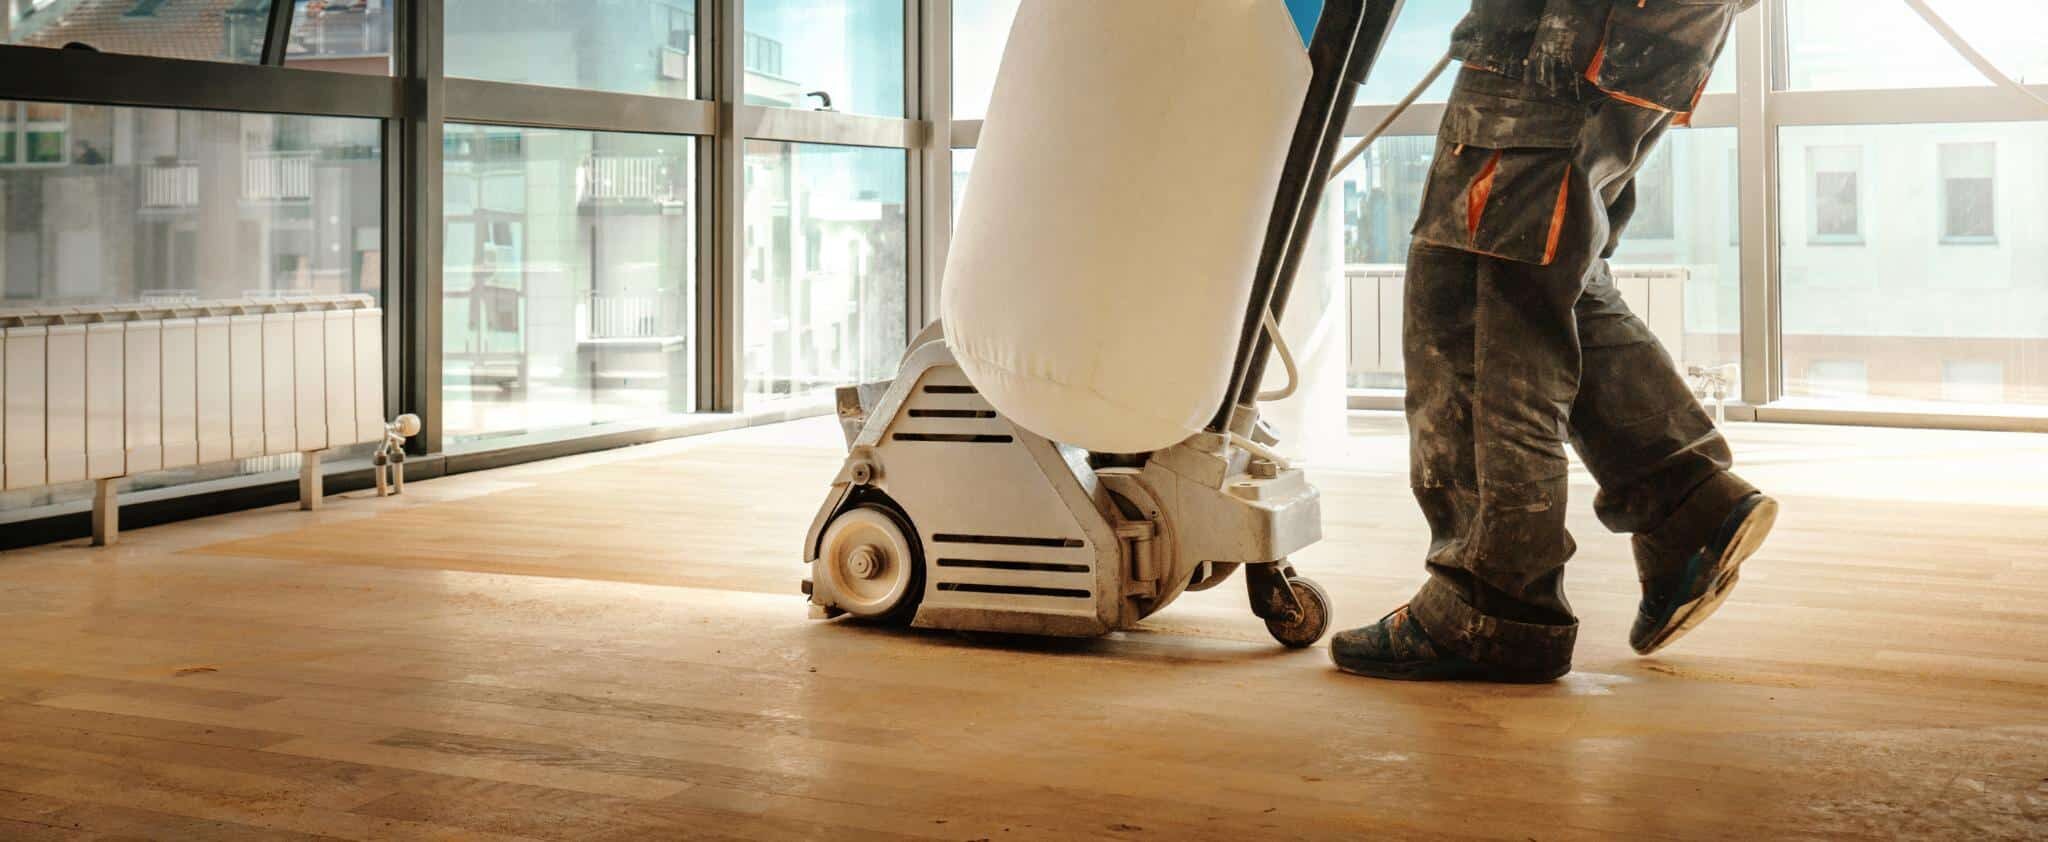 In North Woolwich, E16, Mr Sander® are using a Bona Scorpion drum sander with a 200mm dimension, 1.5kW power, 240V voltage, and 50Hz frequency. The sander is connected to a dust extraction system equipped with a HEPA filter, ensuring a clean and efficient sanding process.